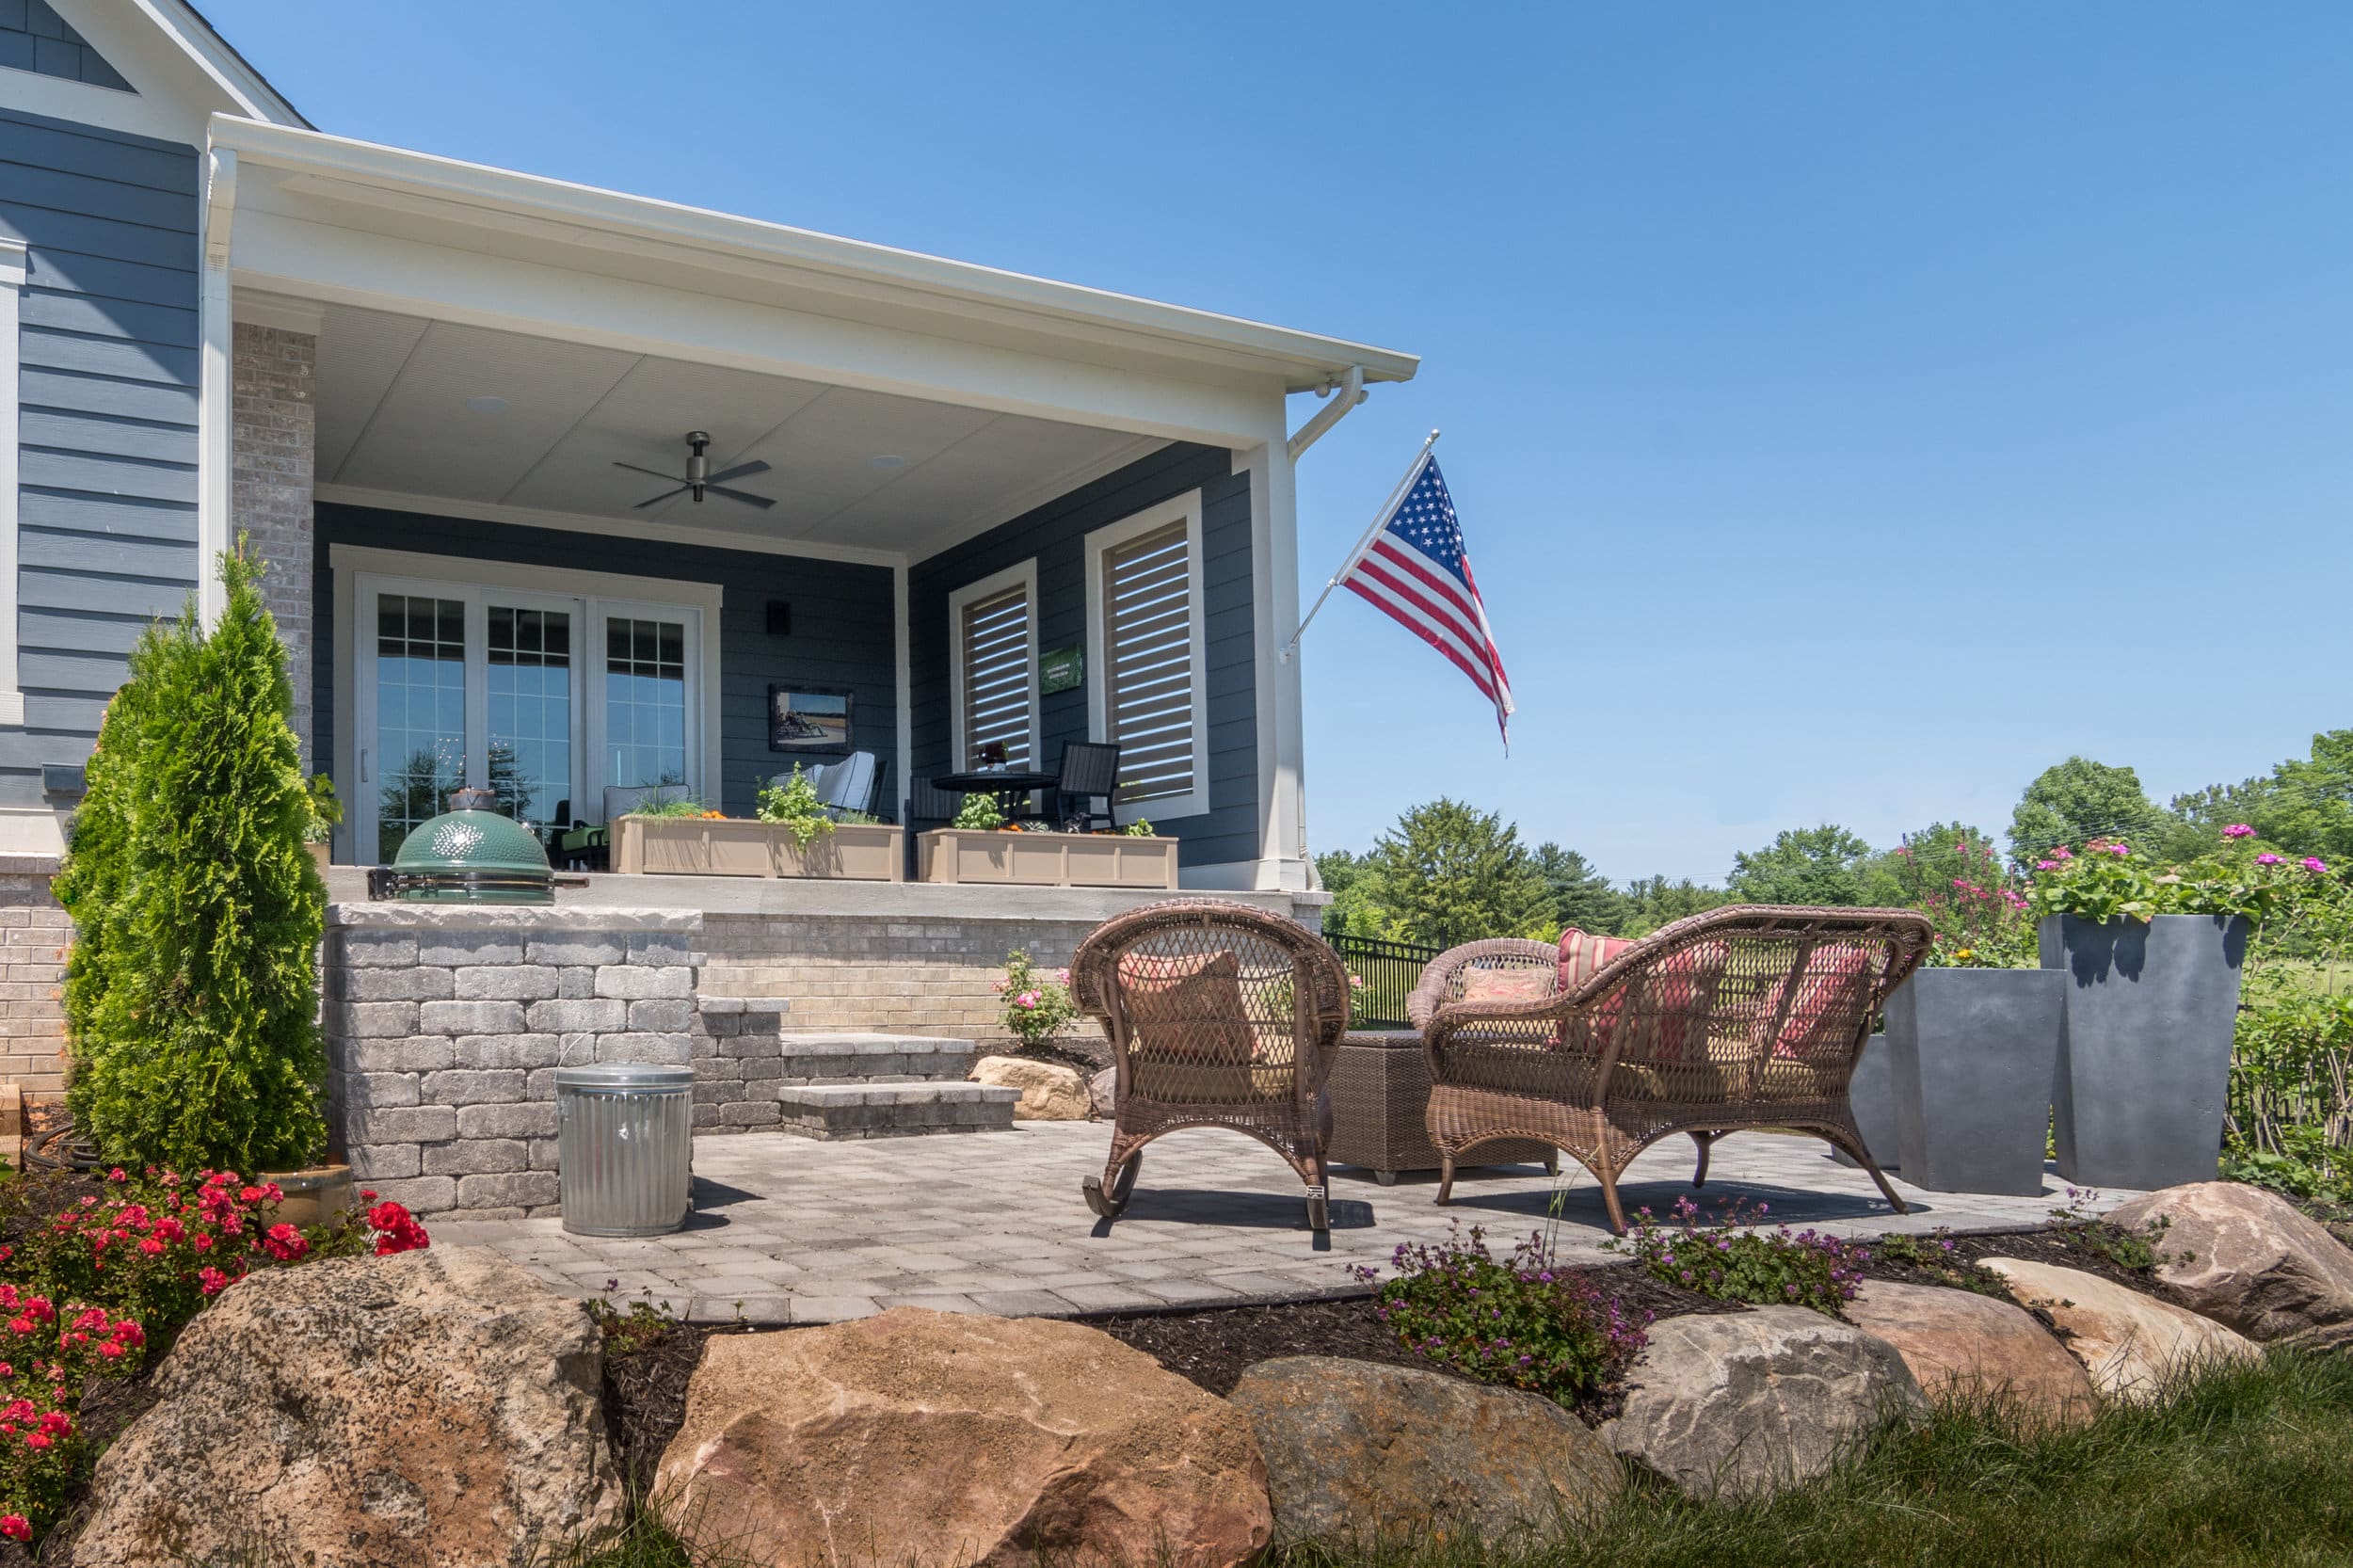 A custom home with an American flag on the front porch.